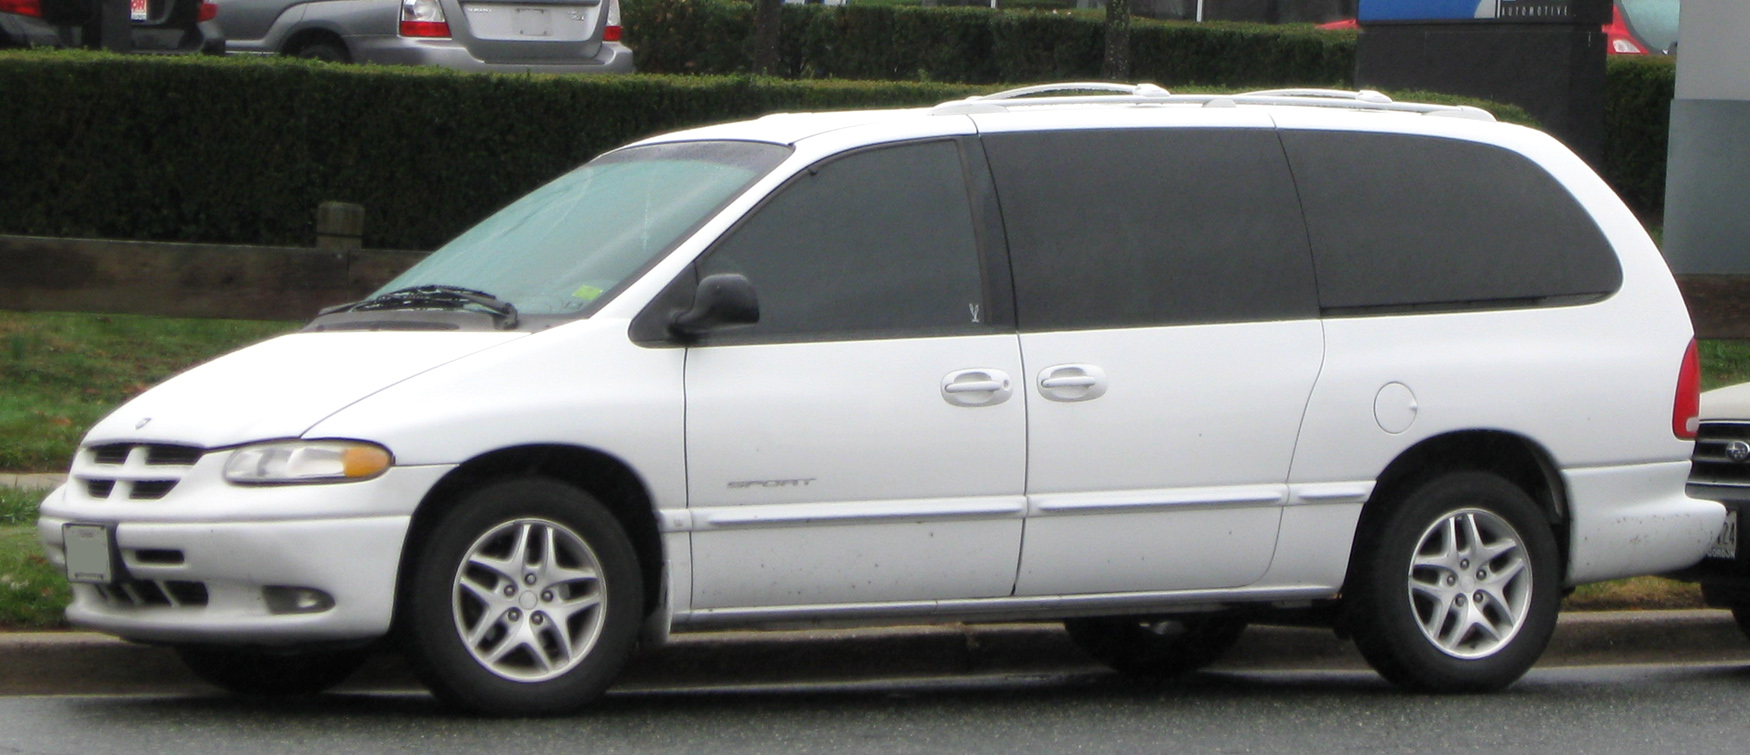 2003 Gold chrysler minivan town and country